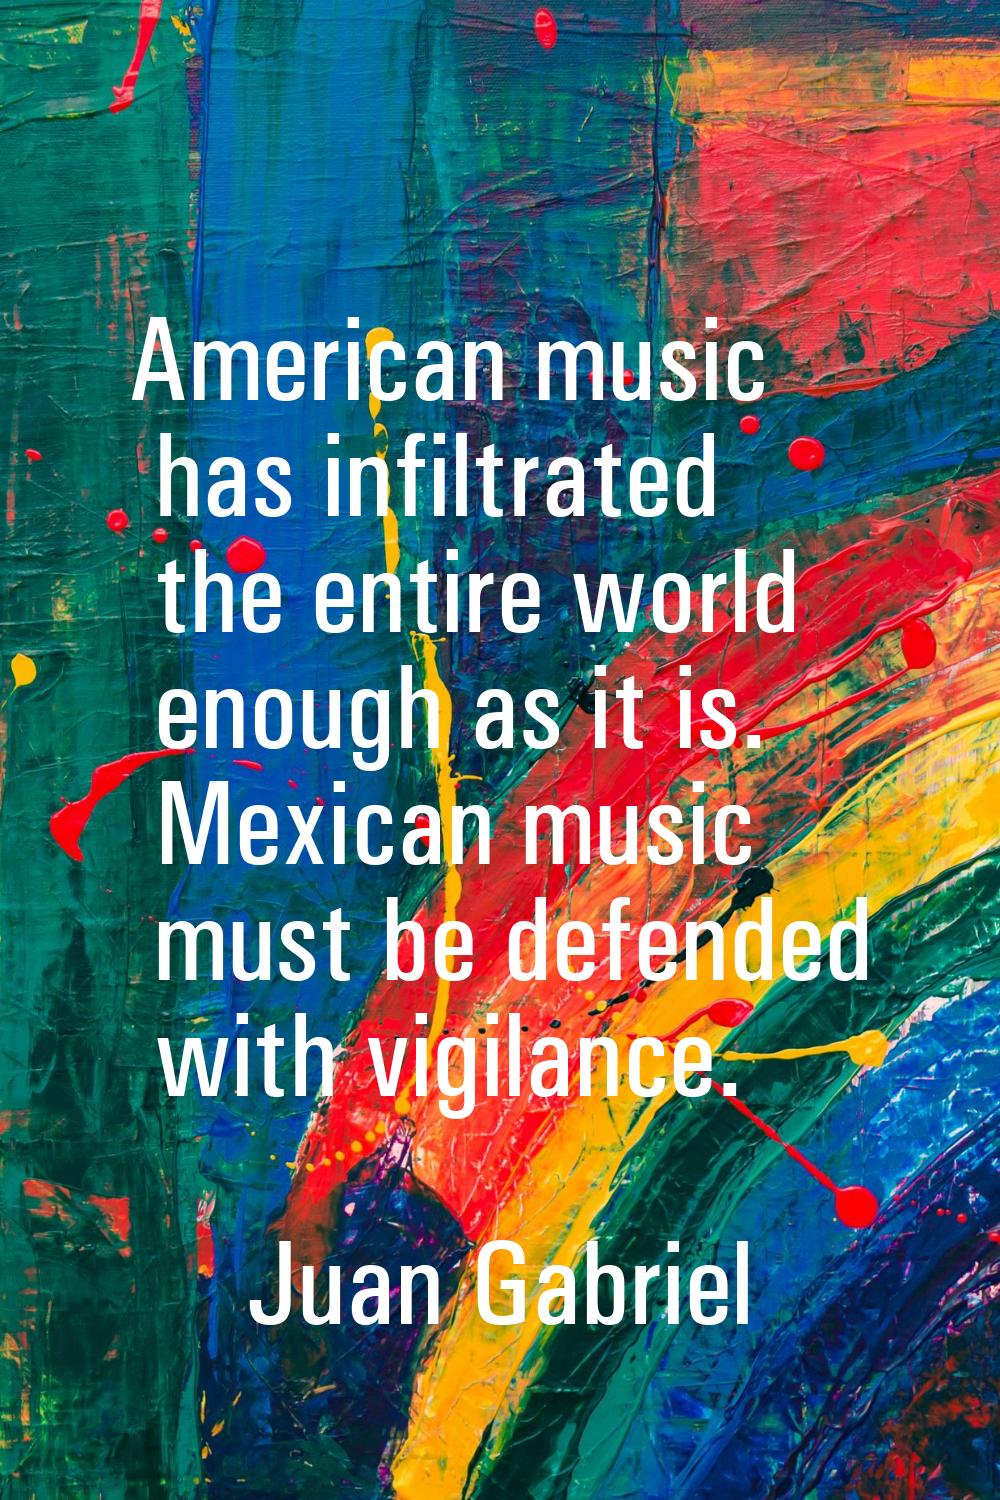 American music has infiltrated the entire world enough as it is. Mexican music must be defended wit